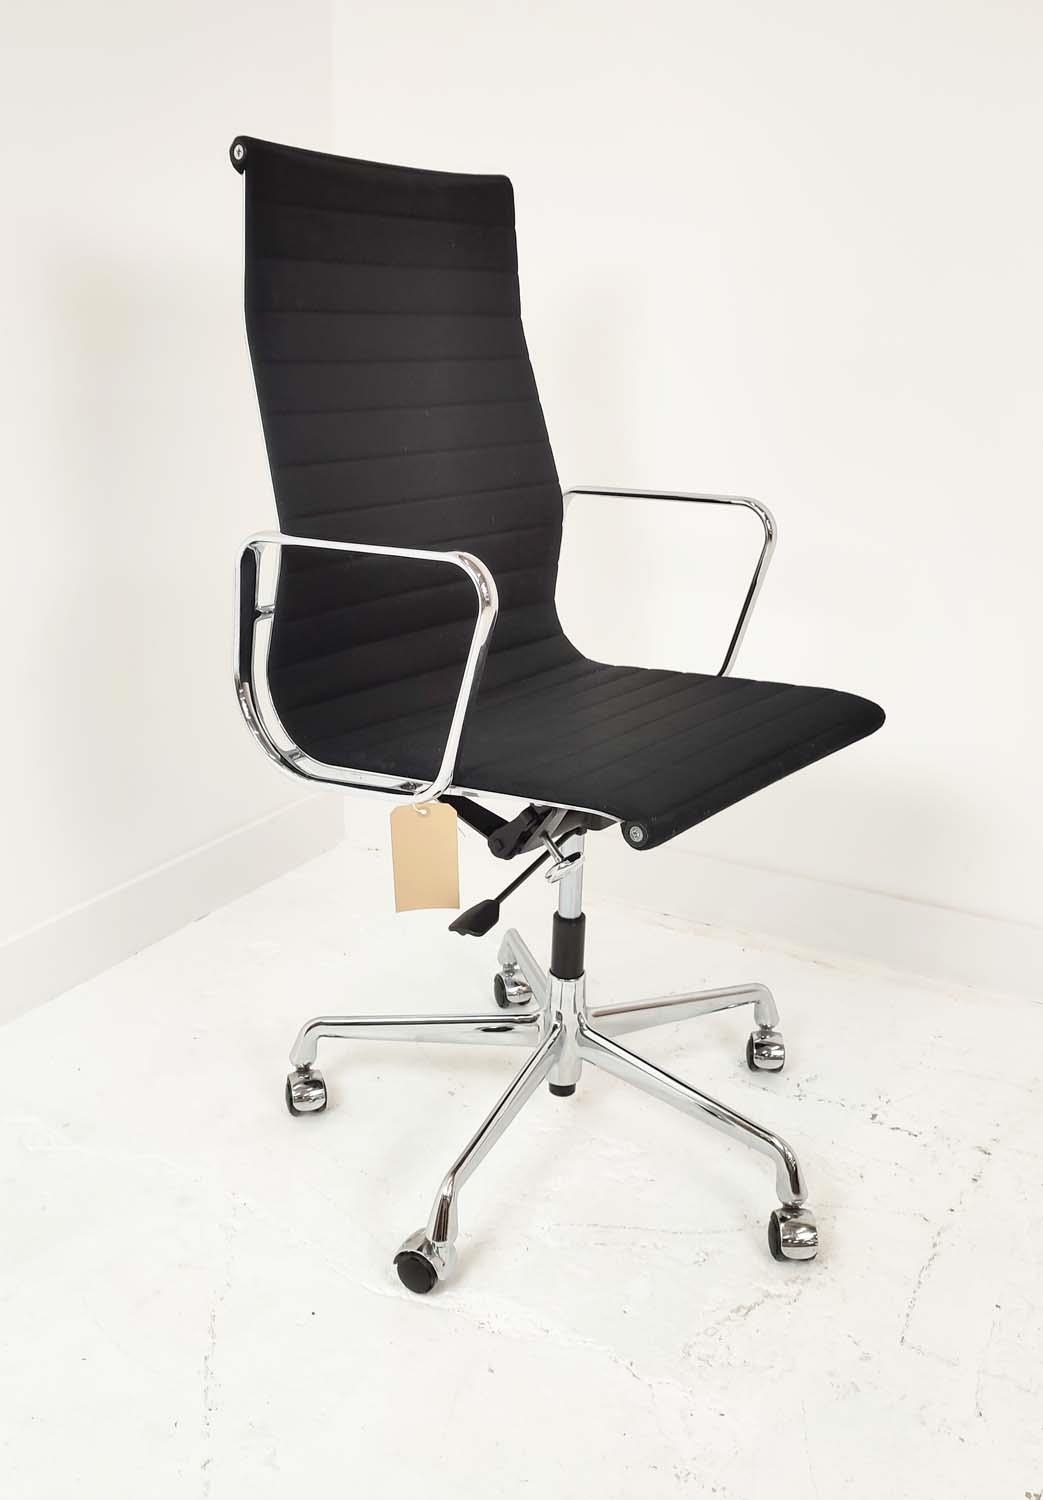 VITRA ALUMINIUM GROUP CHAIR, by Charles and Ray Eames, 113.5cm H at largest. - Image 2 of 9